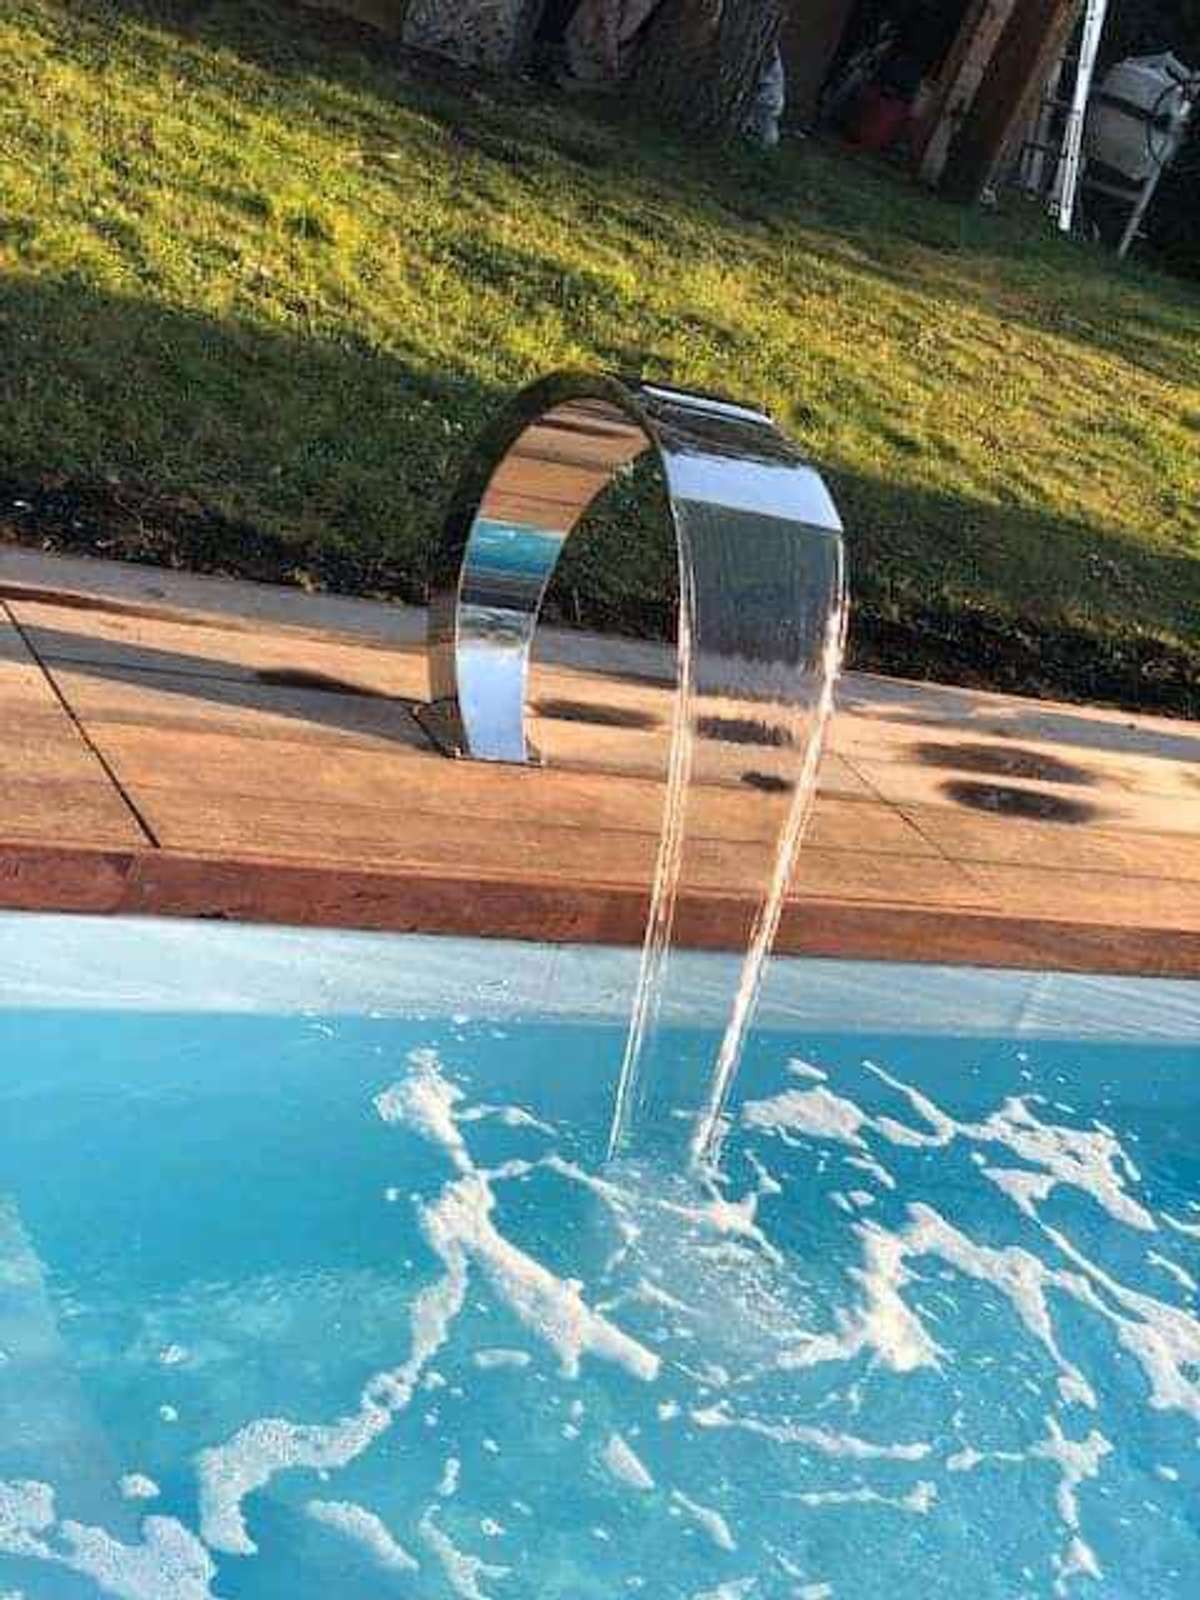 Designs by Swimming Pool Work wave fountains, Delhi | Kolo